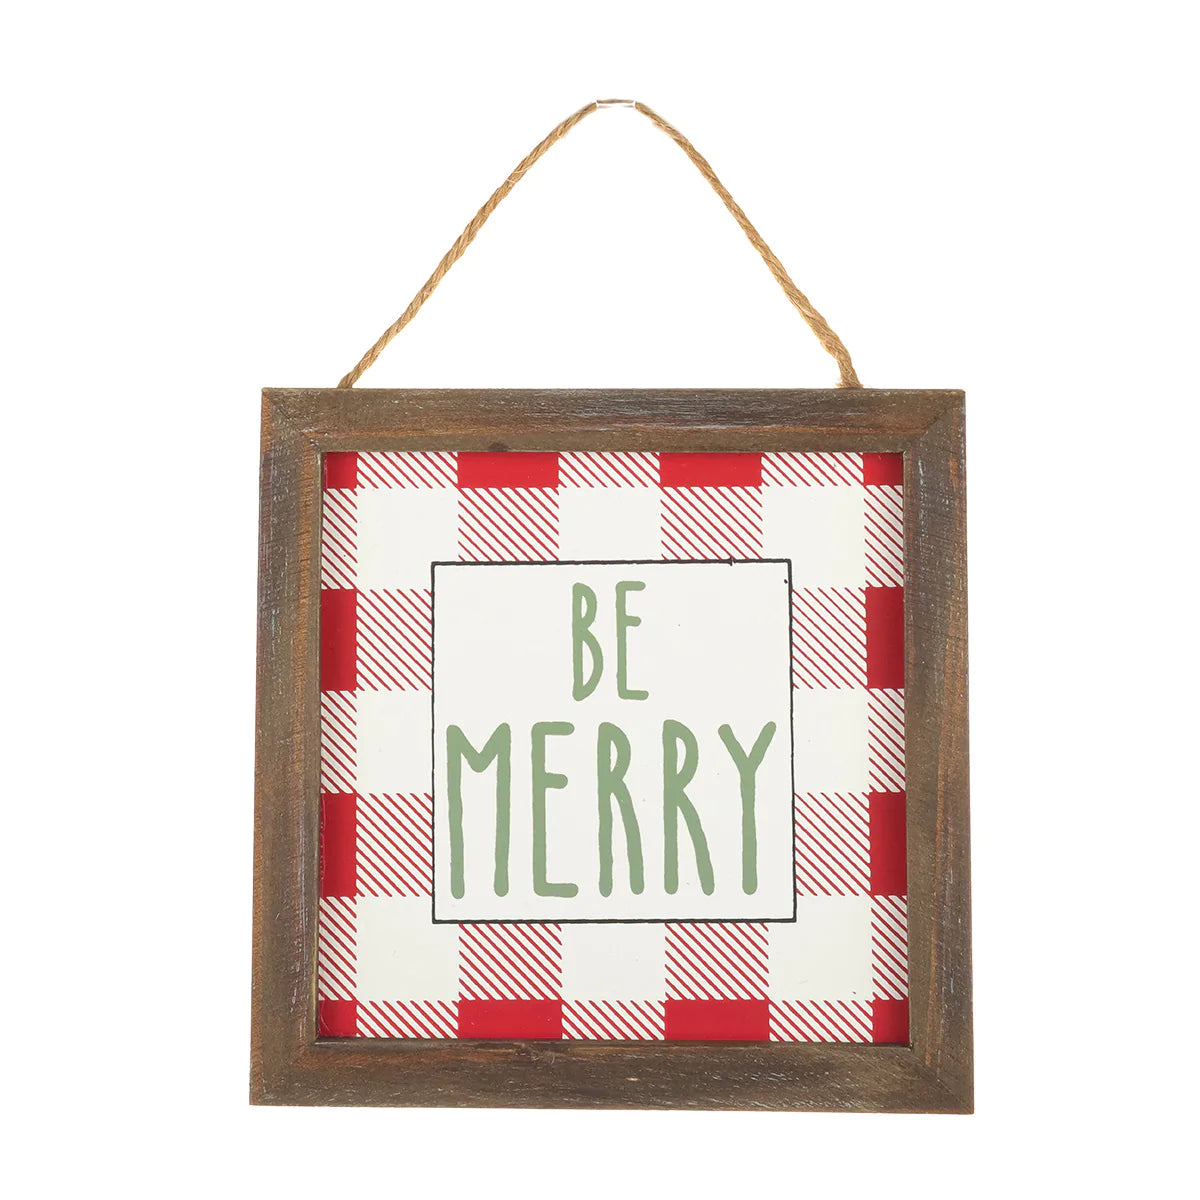 Merry hanging sign